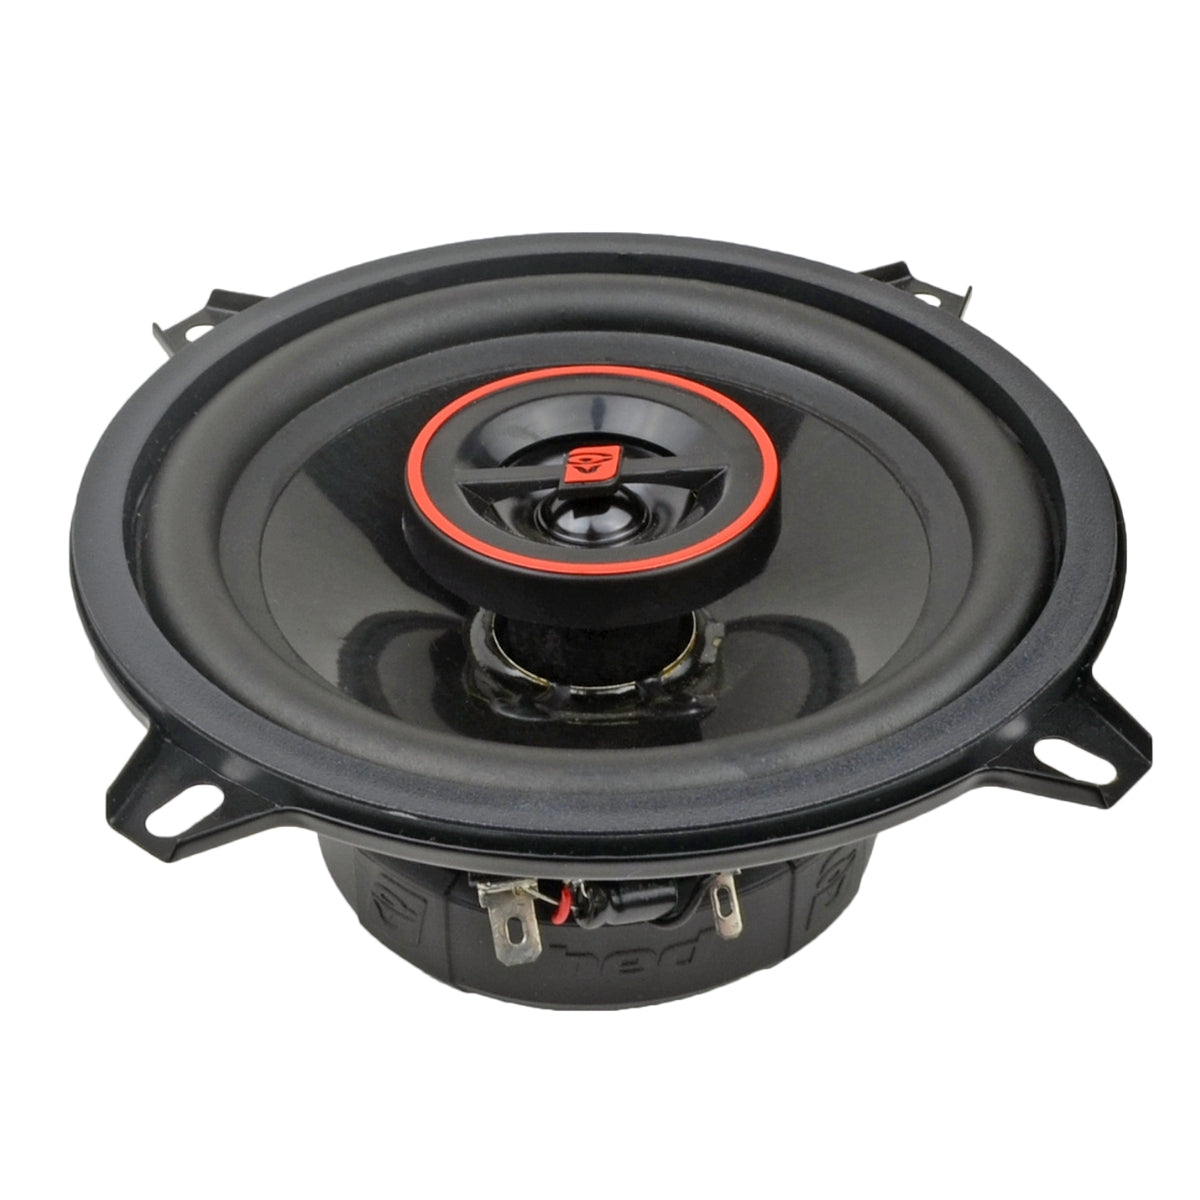 5.25 Inch HED Series Coaxial 2 Way Speaker